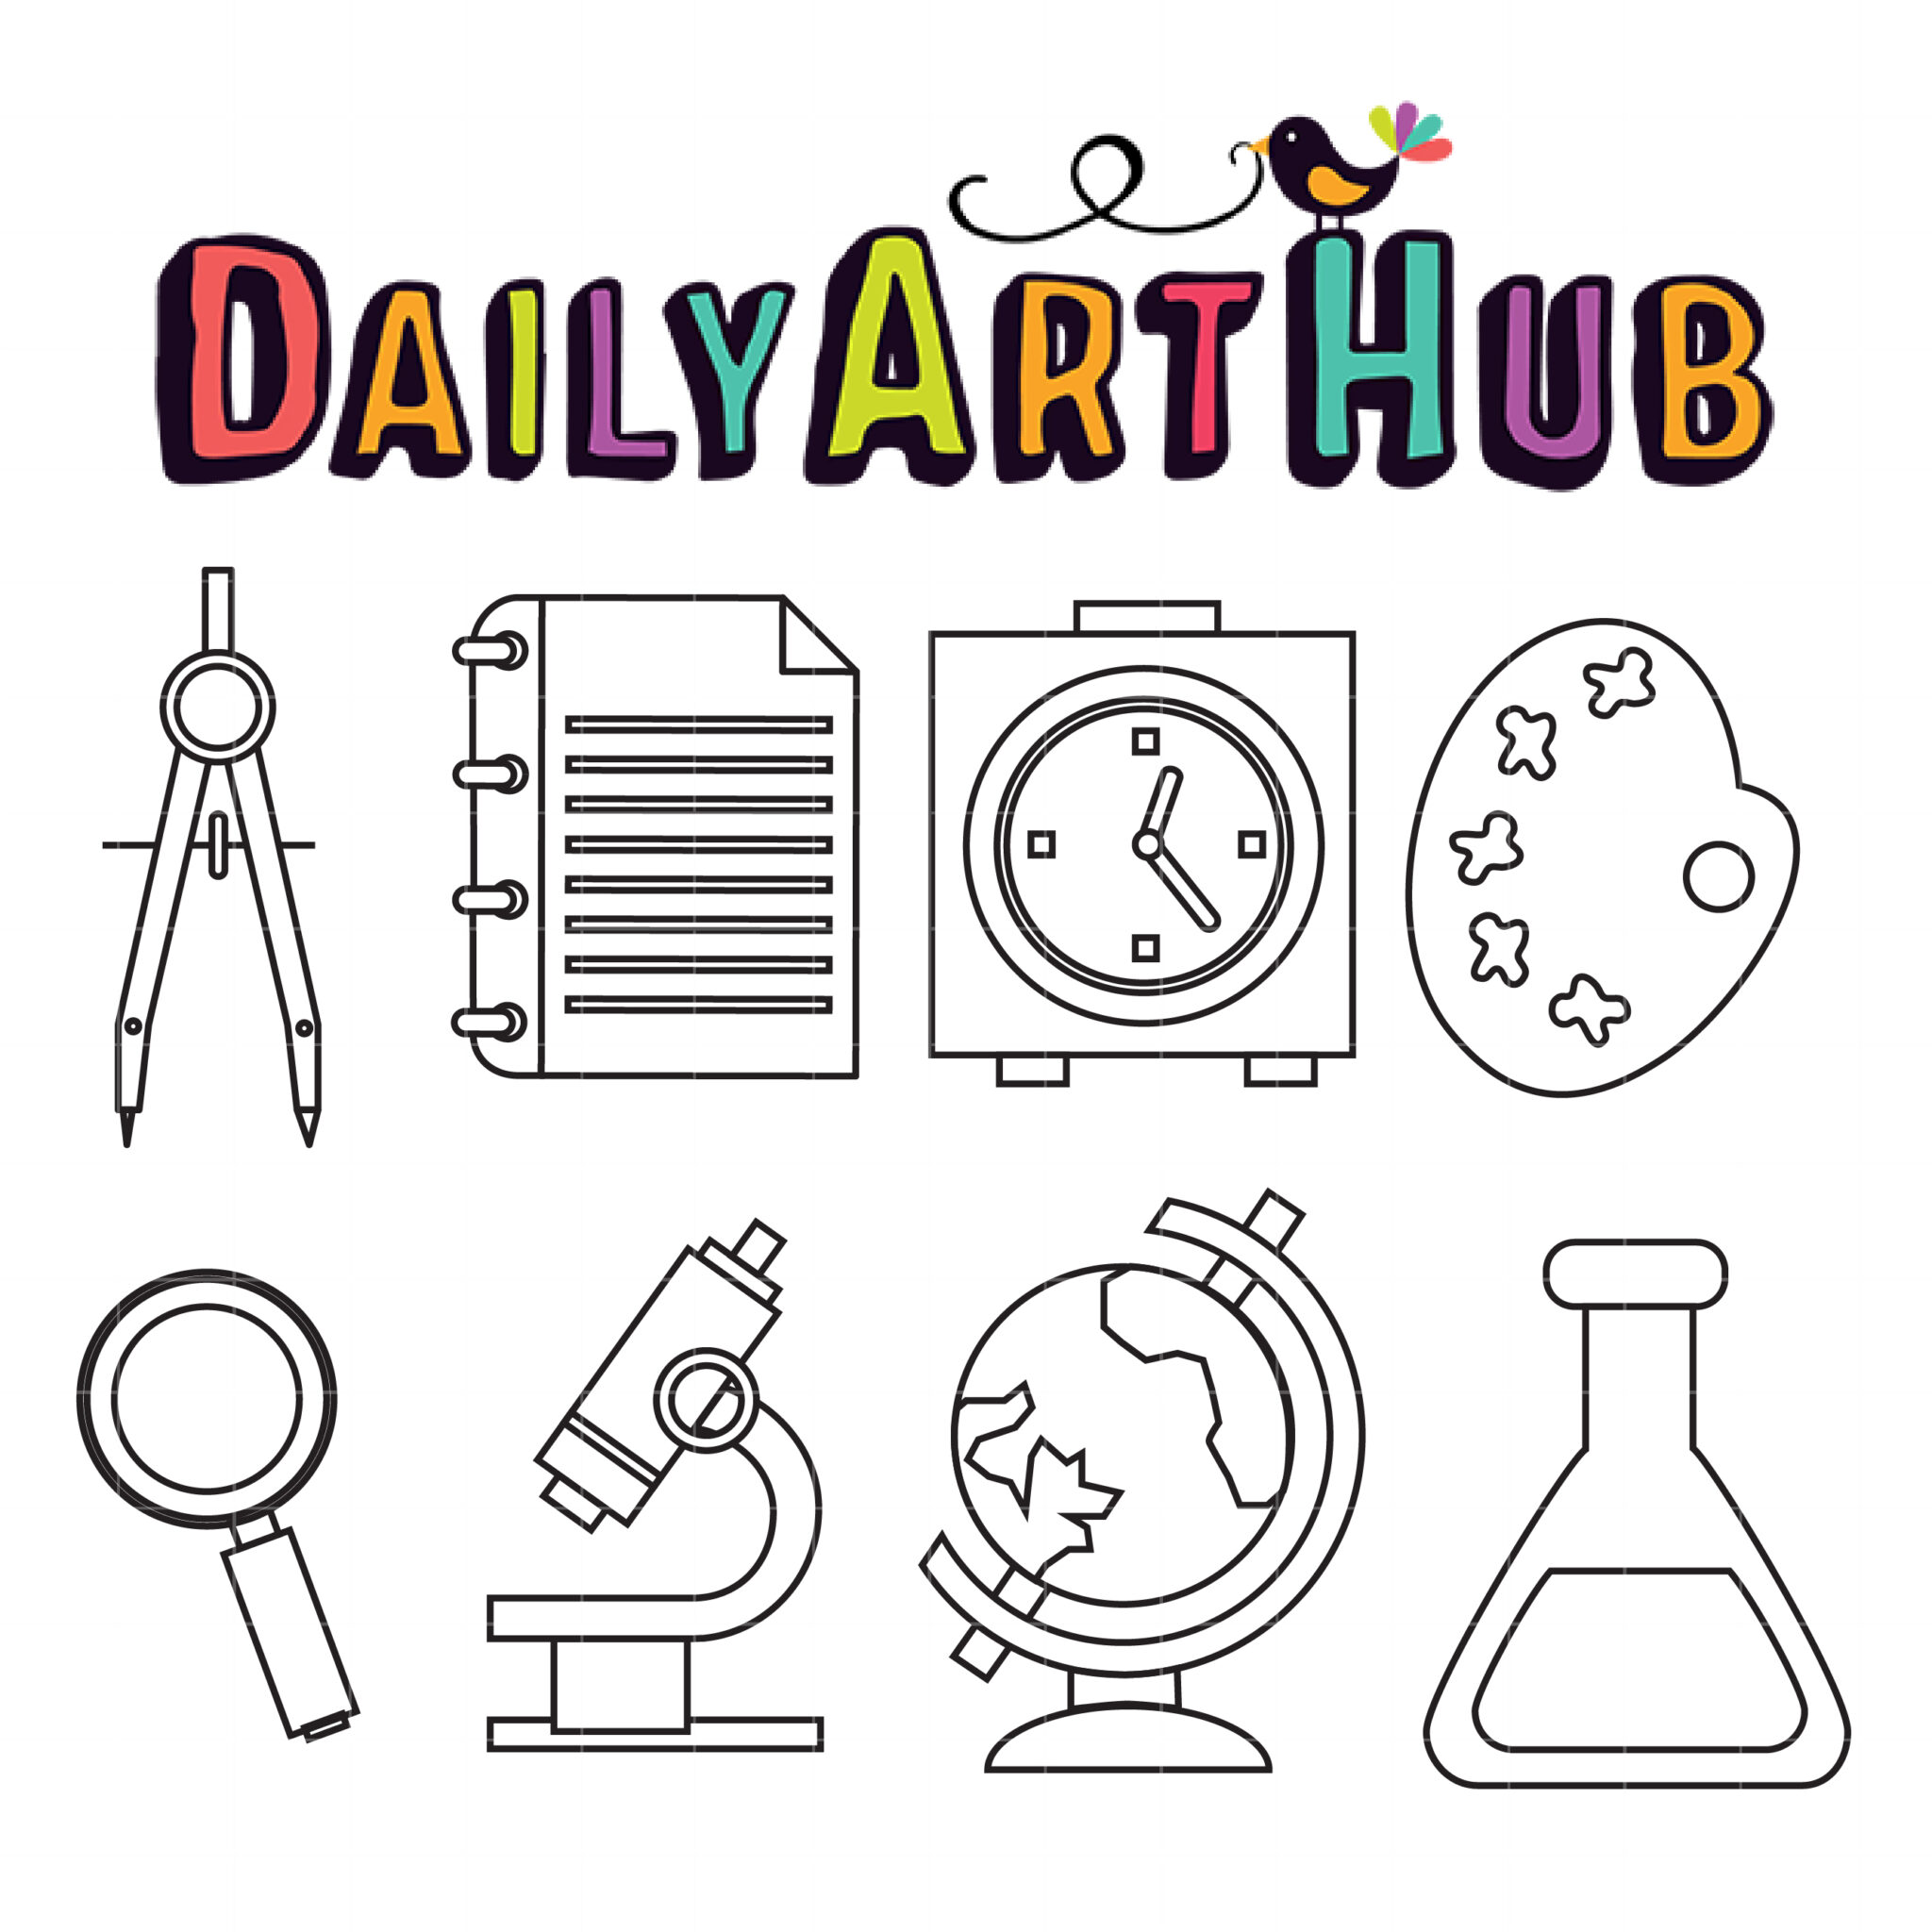 https://www.dailyarthub.com/wp-content/uploads/2021/08/Science-Laboratory-Outline-scaled.jpg